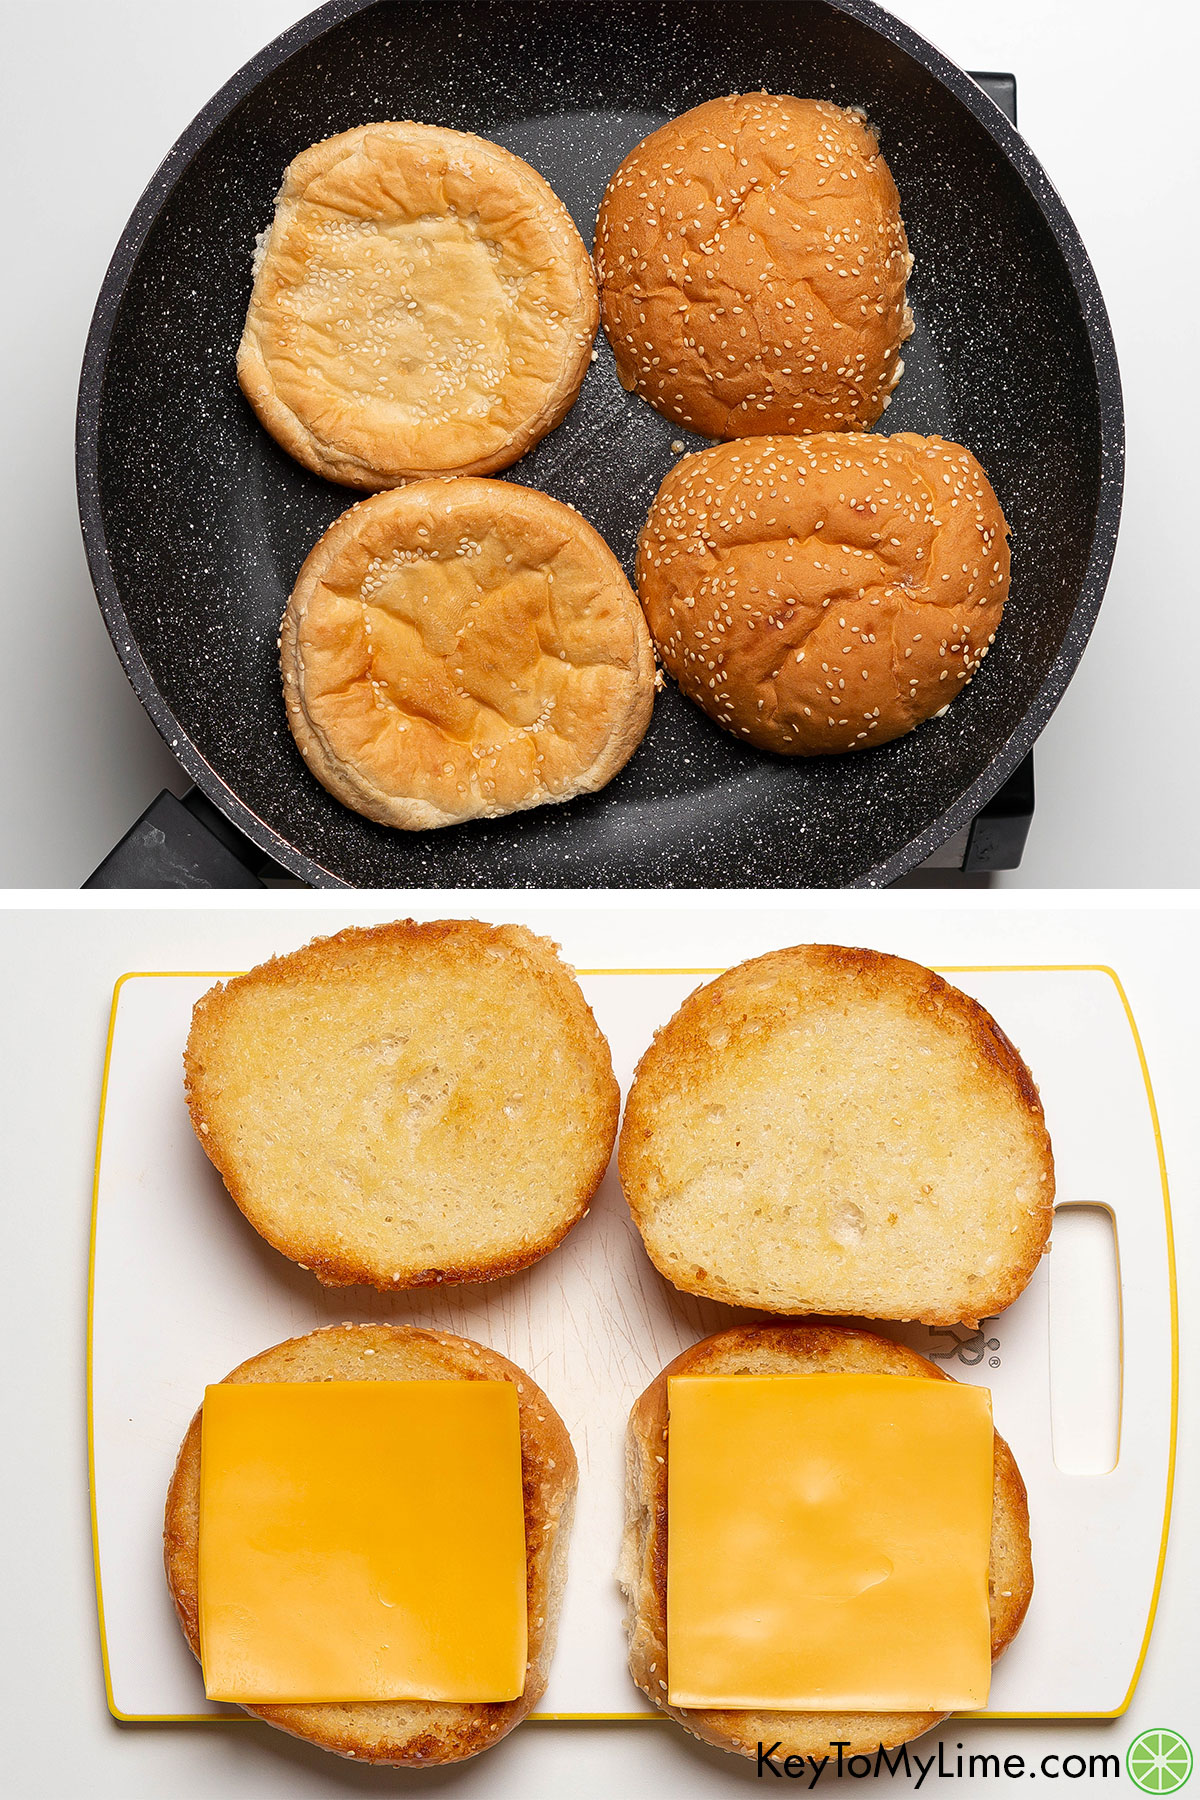 Toasting sesame seed hamburger buns with butter, then adding American cheese to the bottom half.